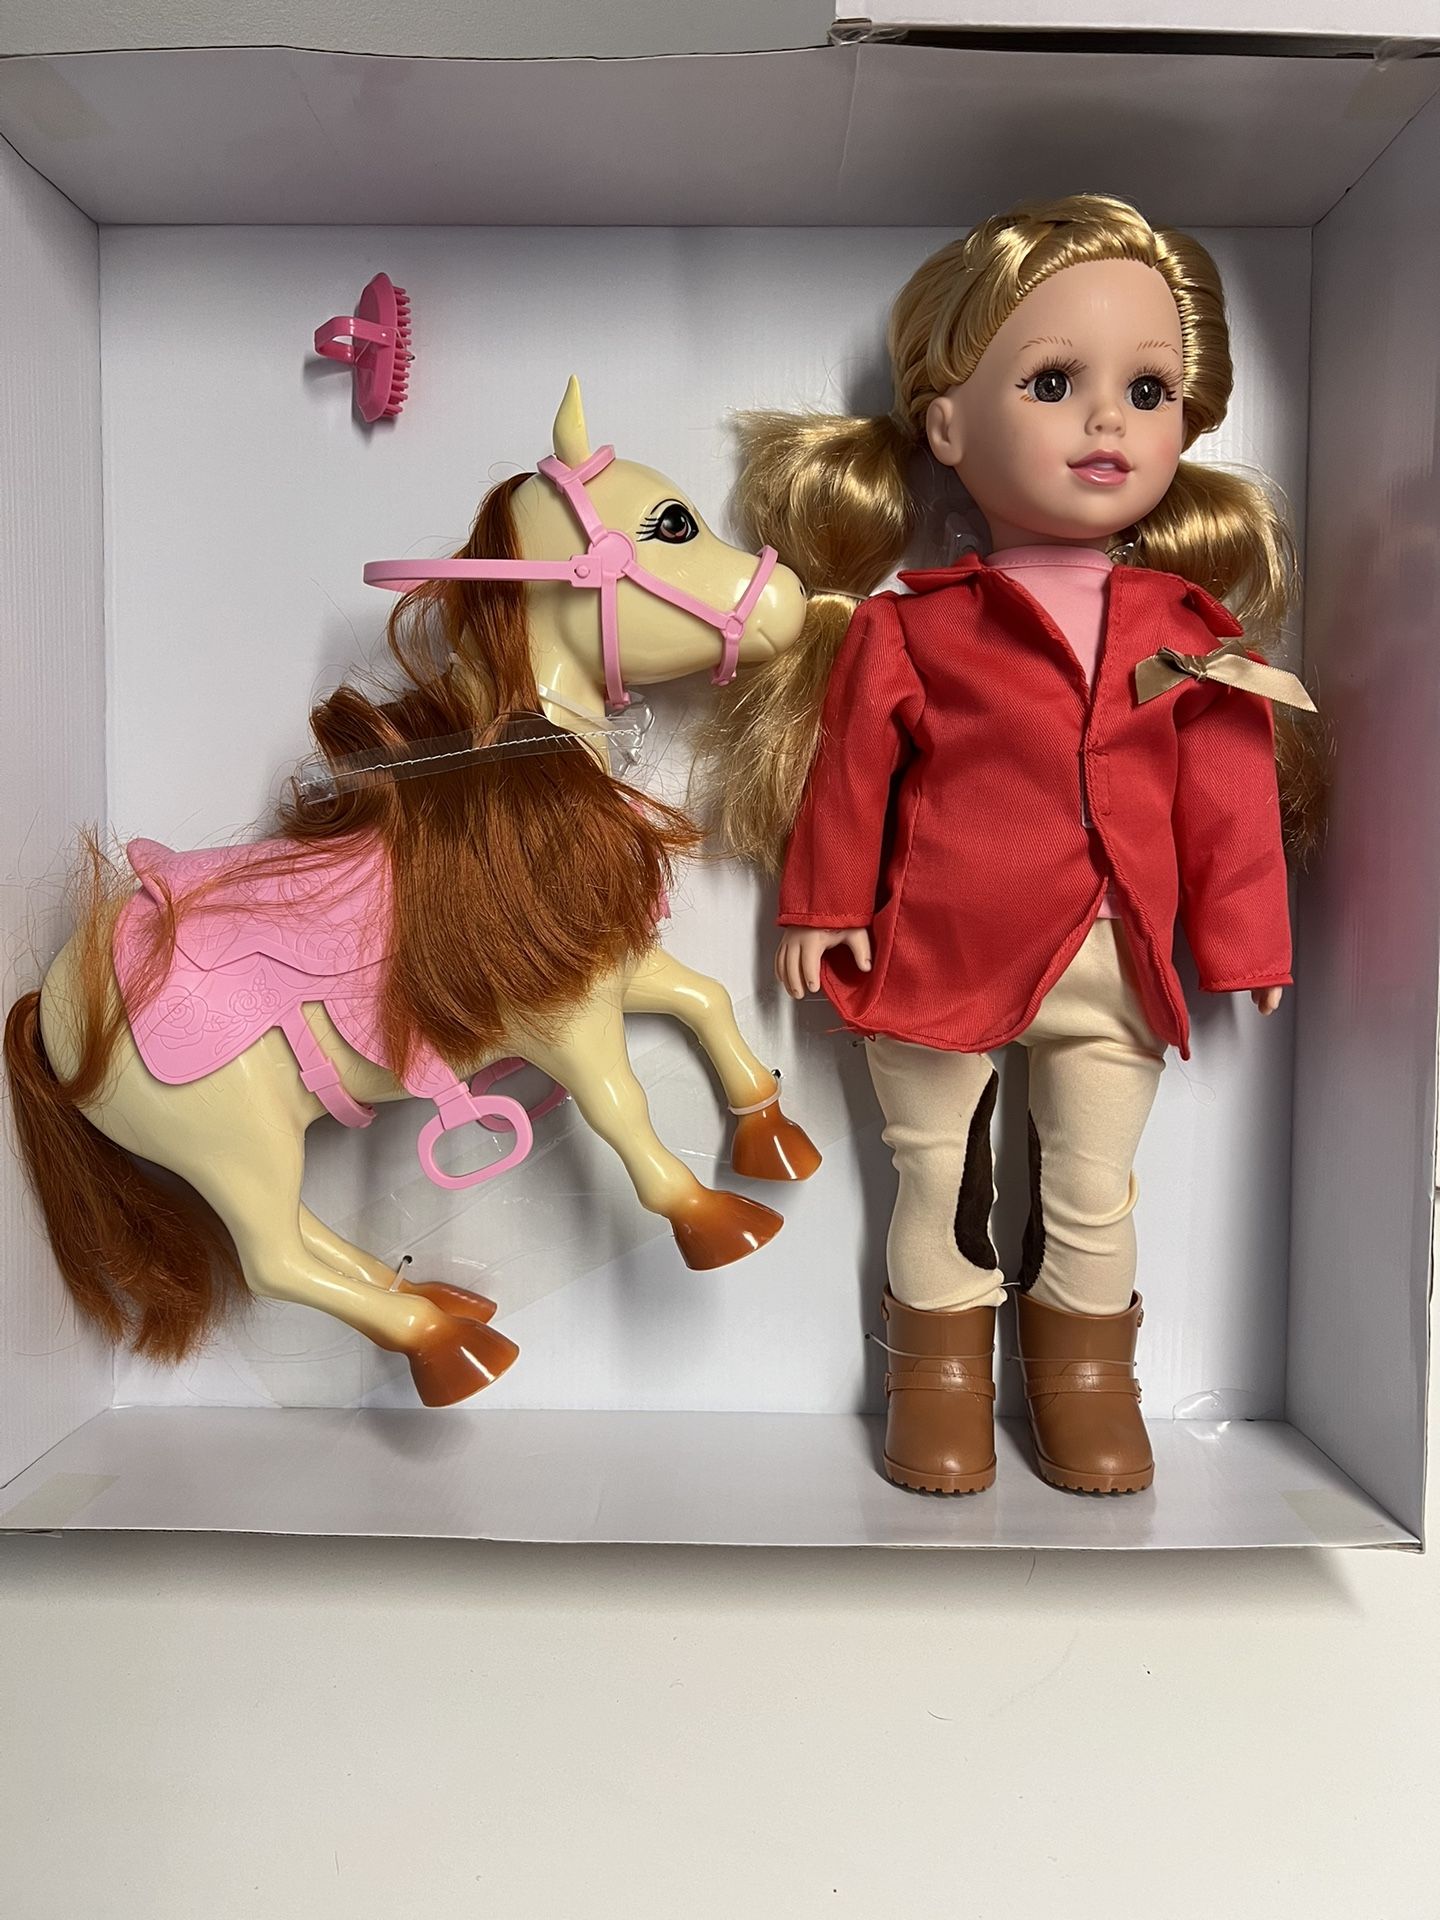 Style Girls Doll With Pony